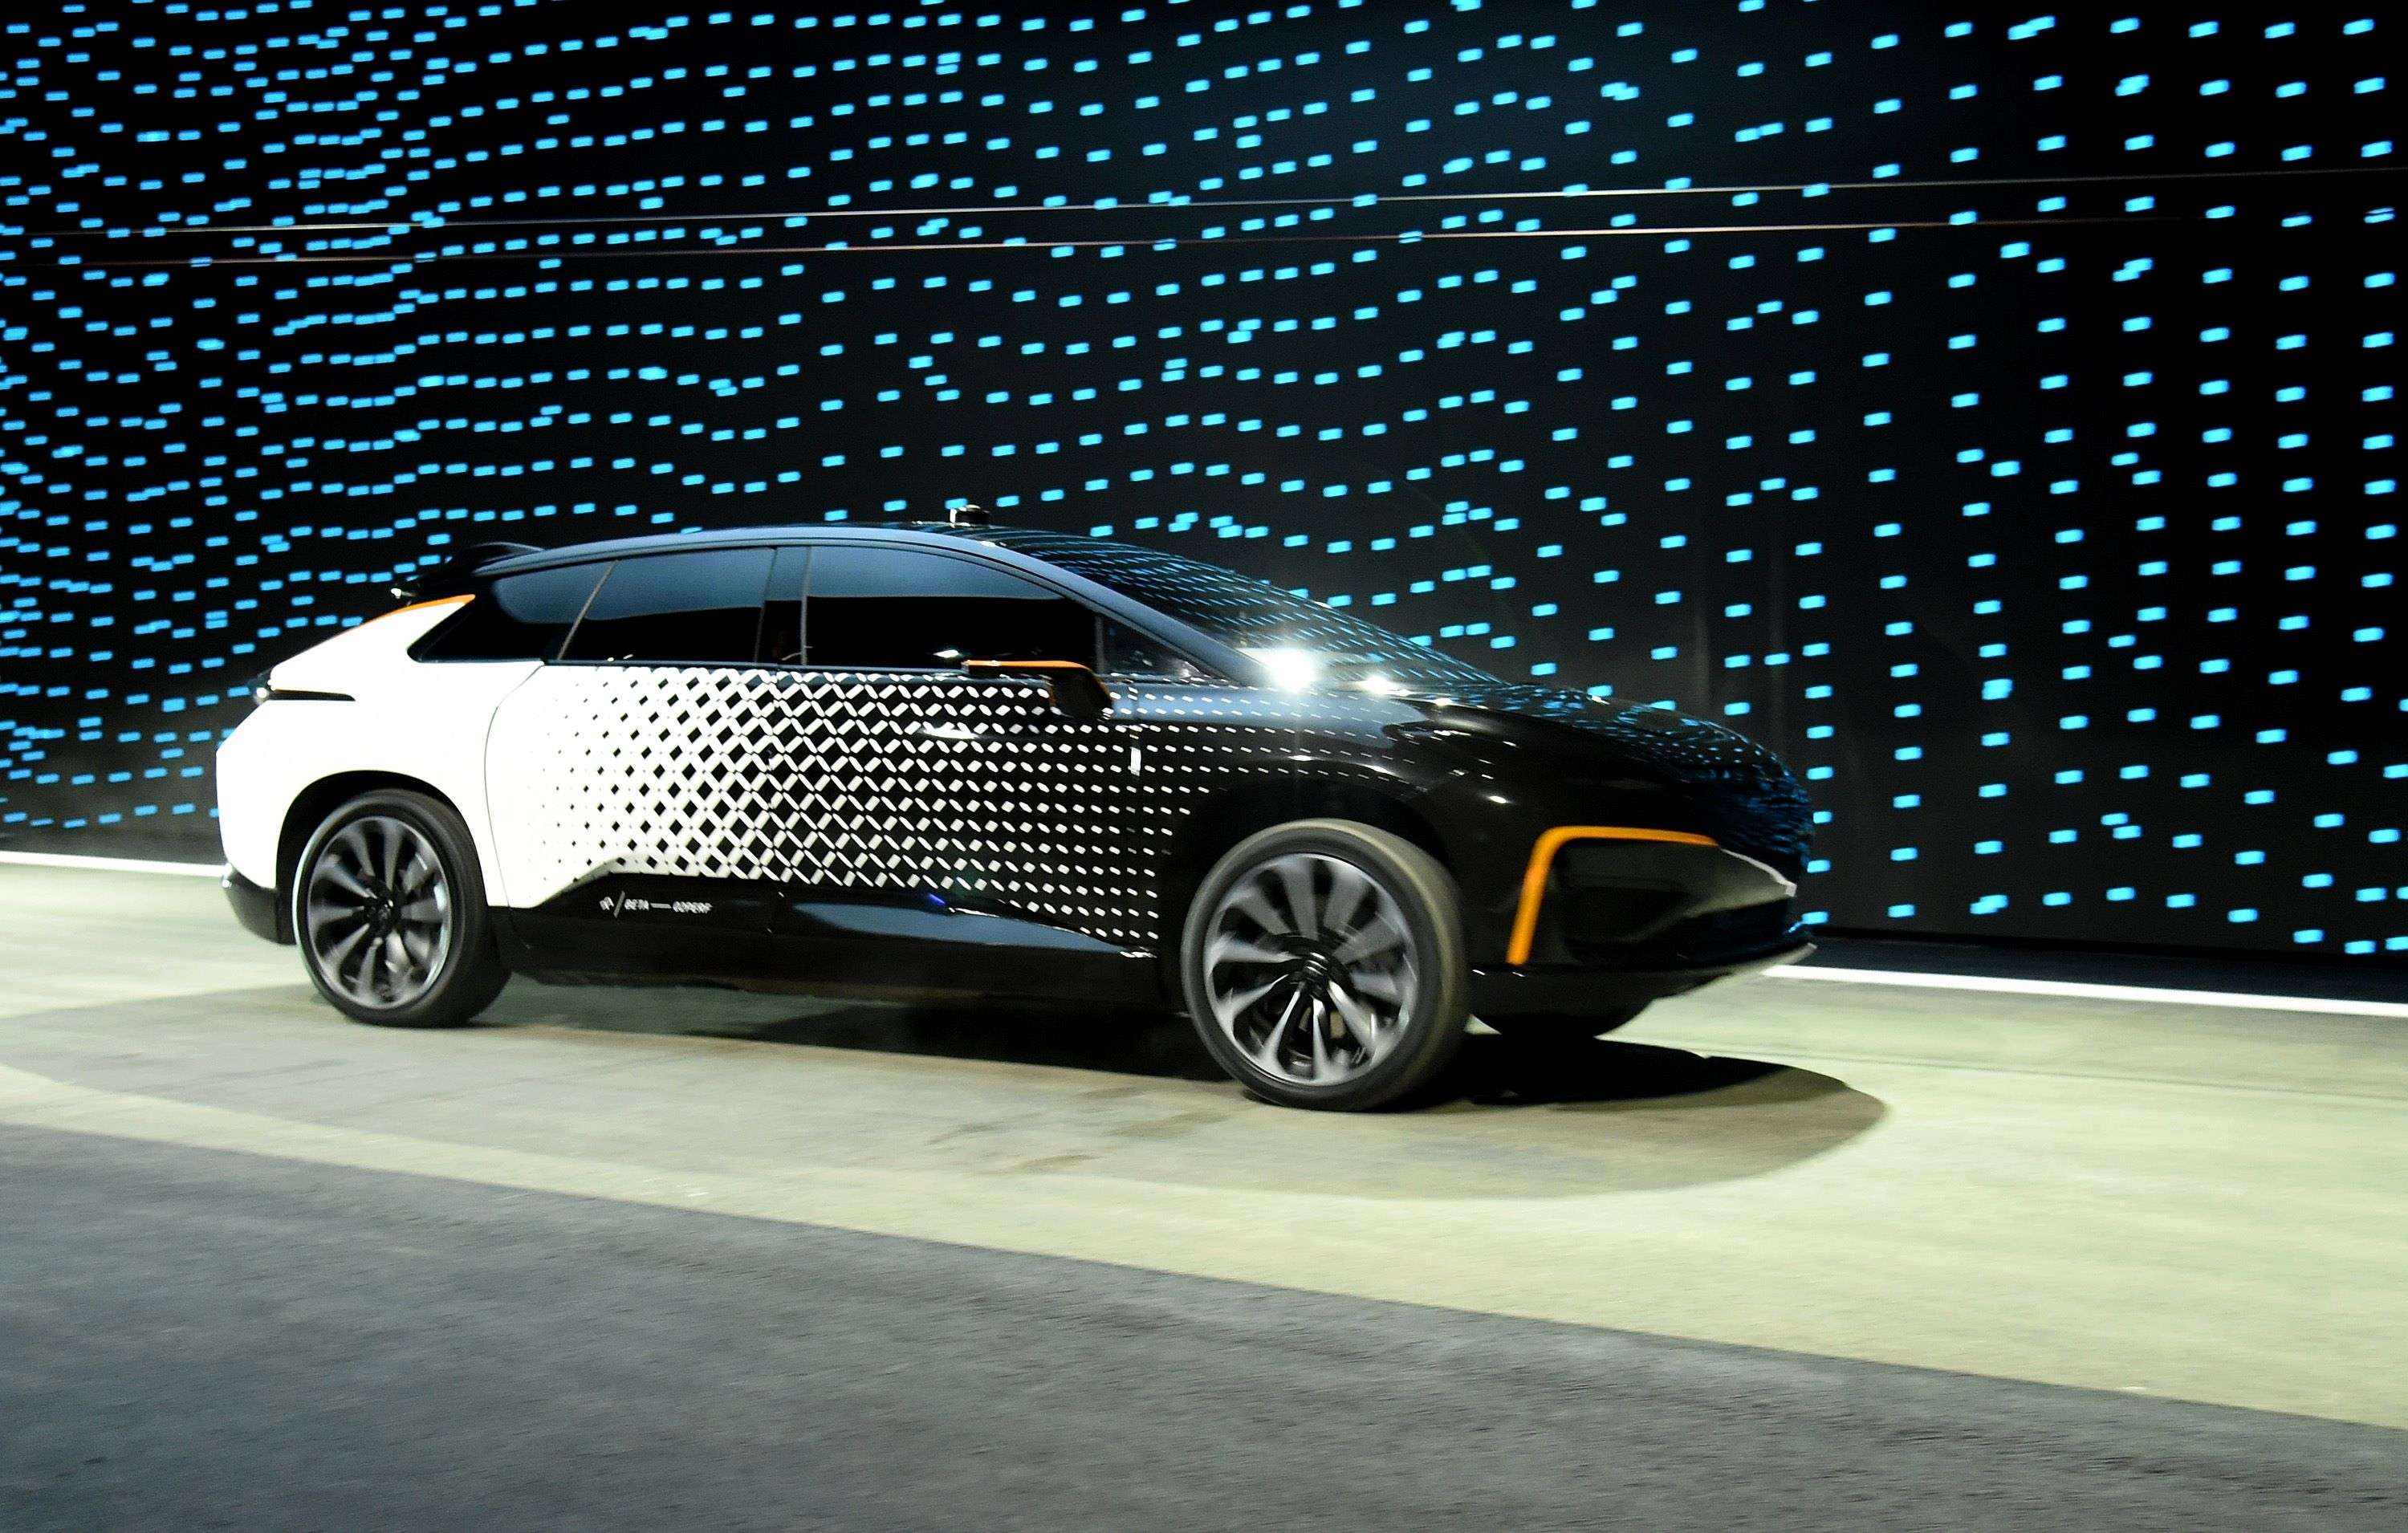 Faraday Future's FF 91 prototype electric crossover vehicle is unveiled in Las Vegas, Nevada. Photo: AFP/Reuters